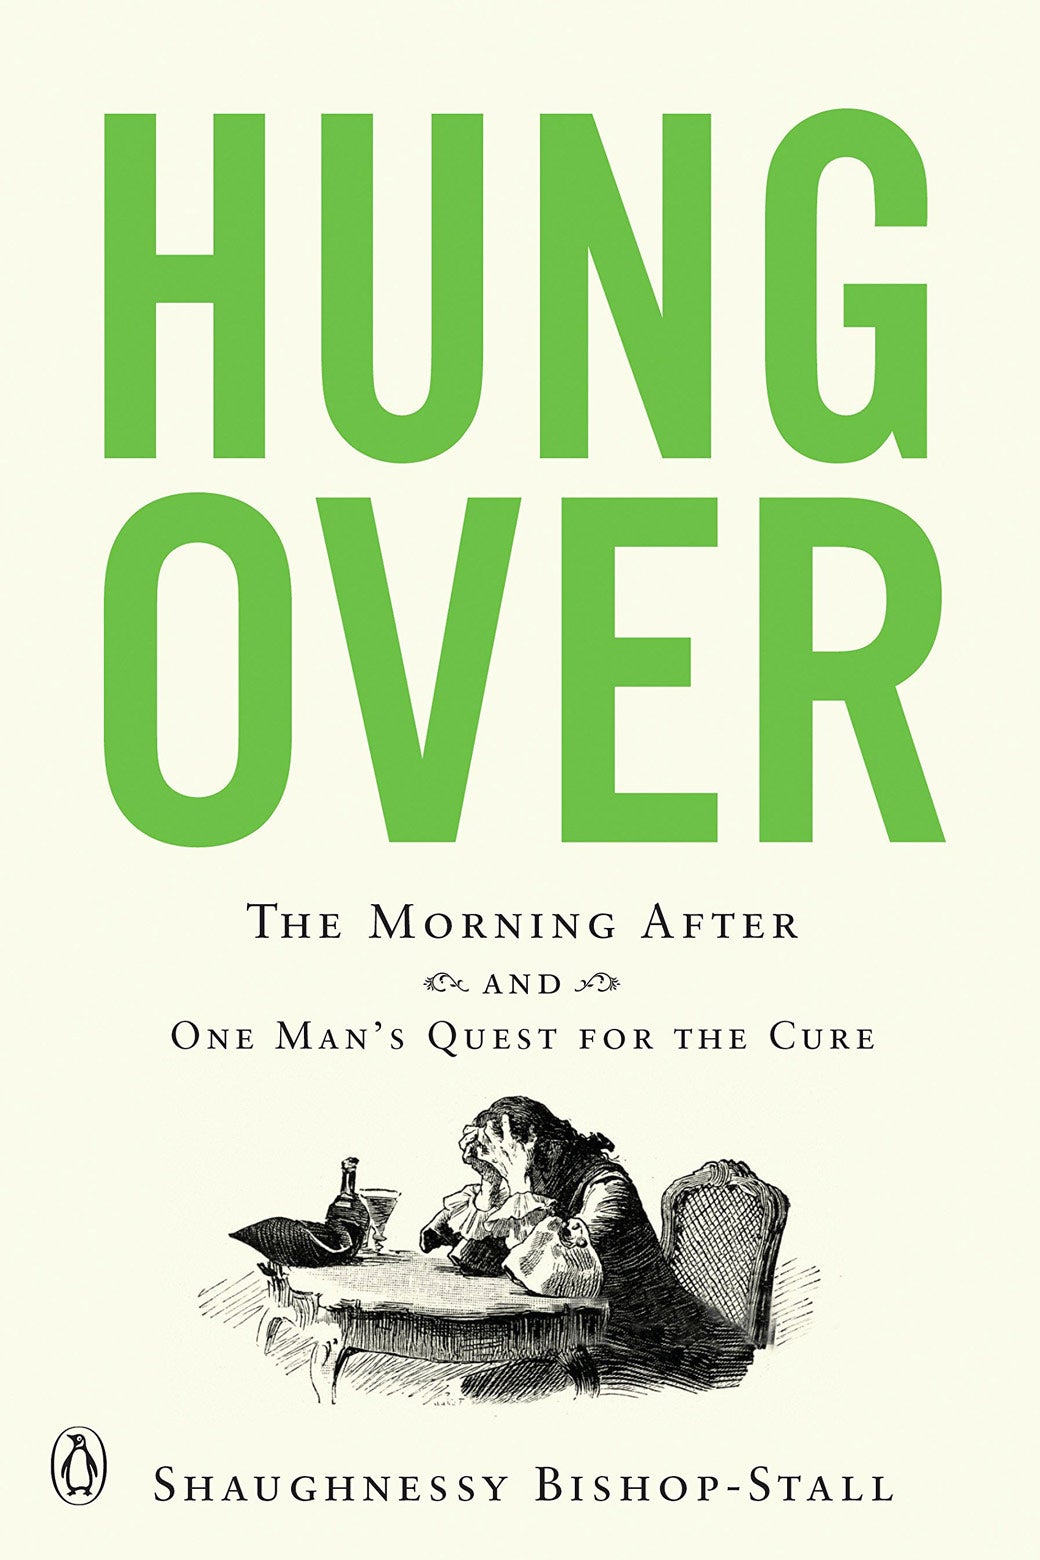 Book cover of Hungover: The Morning After and One Man’s Quest for the Cure.